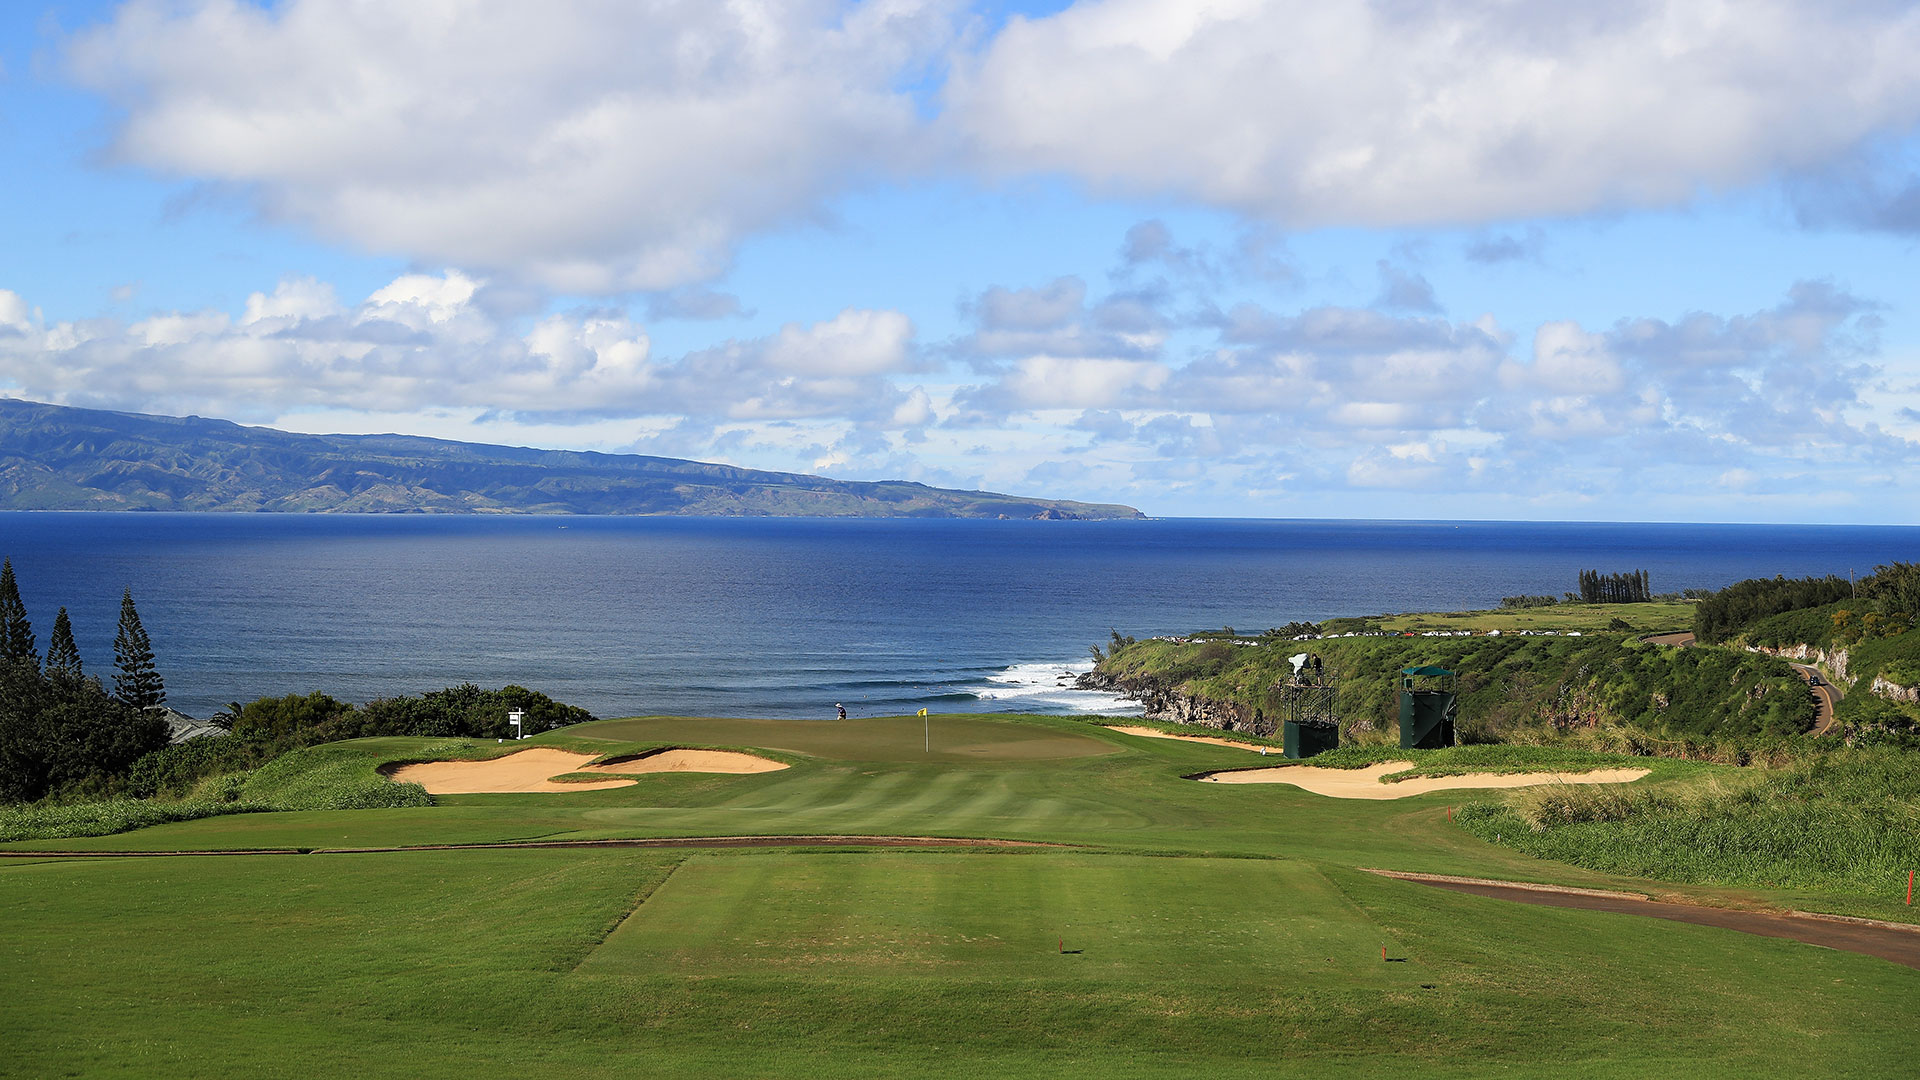 Players without a win still headed to Kapalua thanks to making Tour Championship